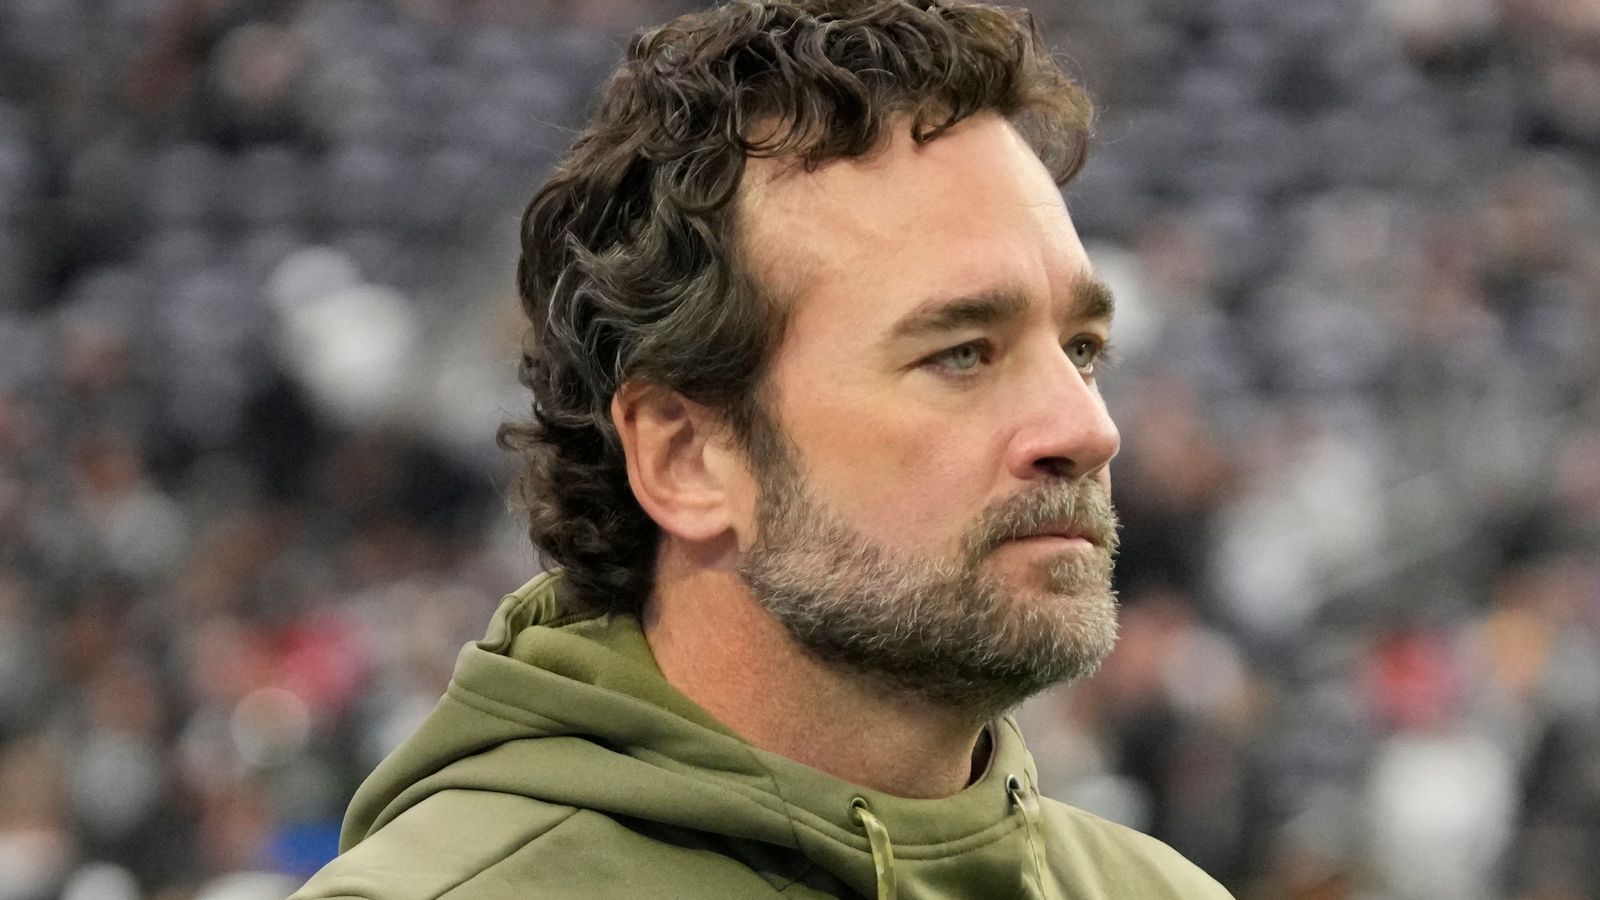 Jeff Saturday: Can the Indianapolis Colts interim head coach keep team winning despite controversy surrounding his hiring?